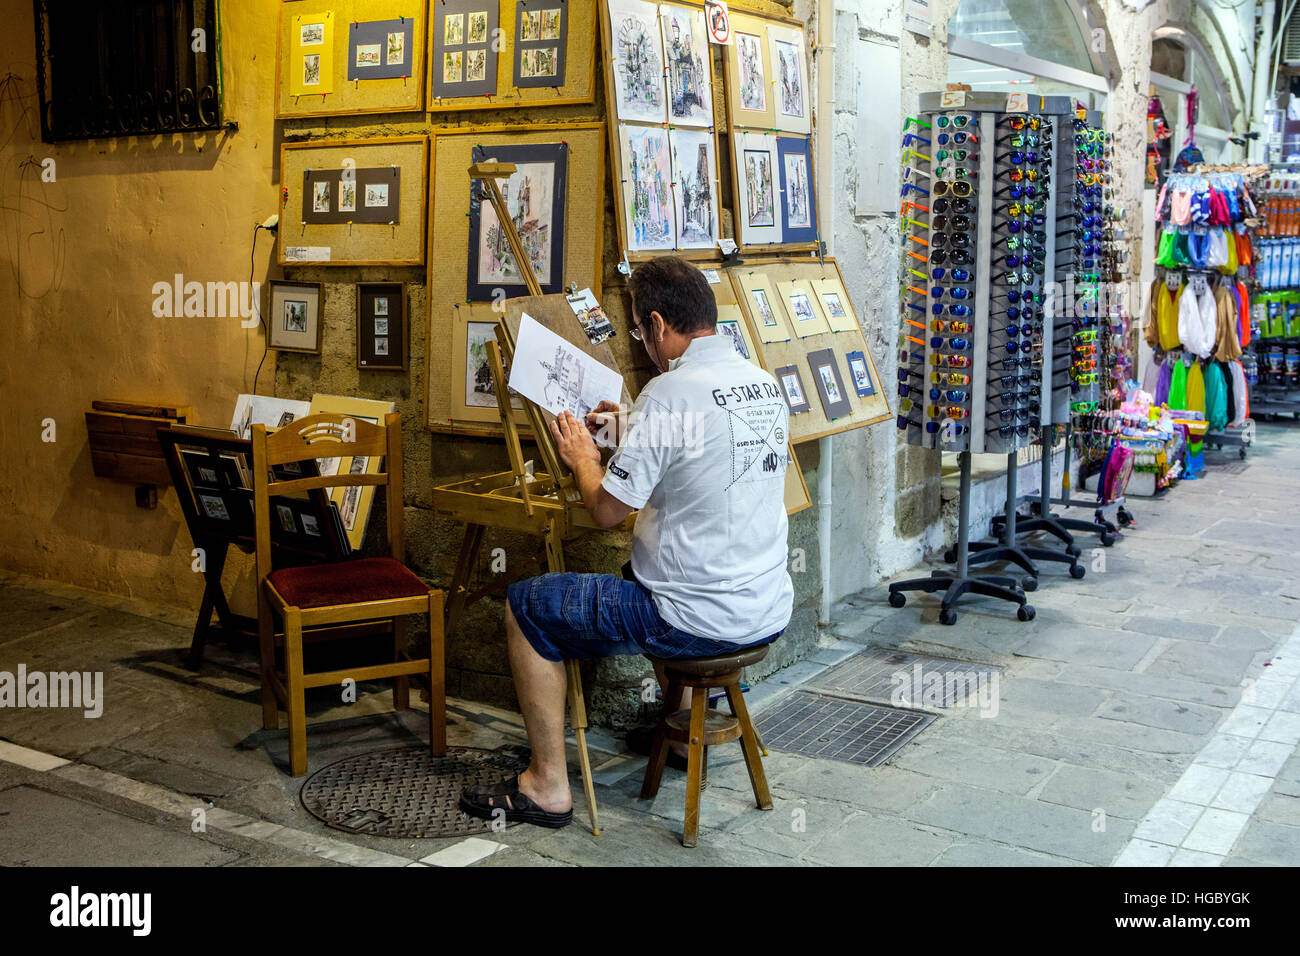 The man on the street in front of his store with art and souvenirs Rethymno, Crete, Greece Stock Photo